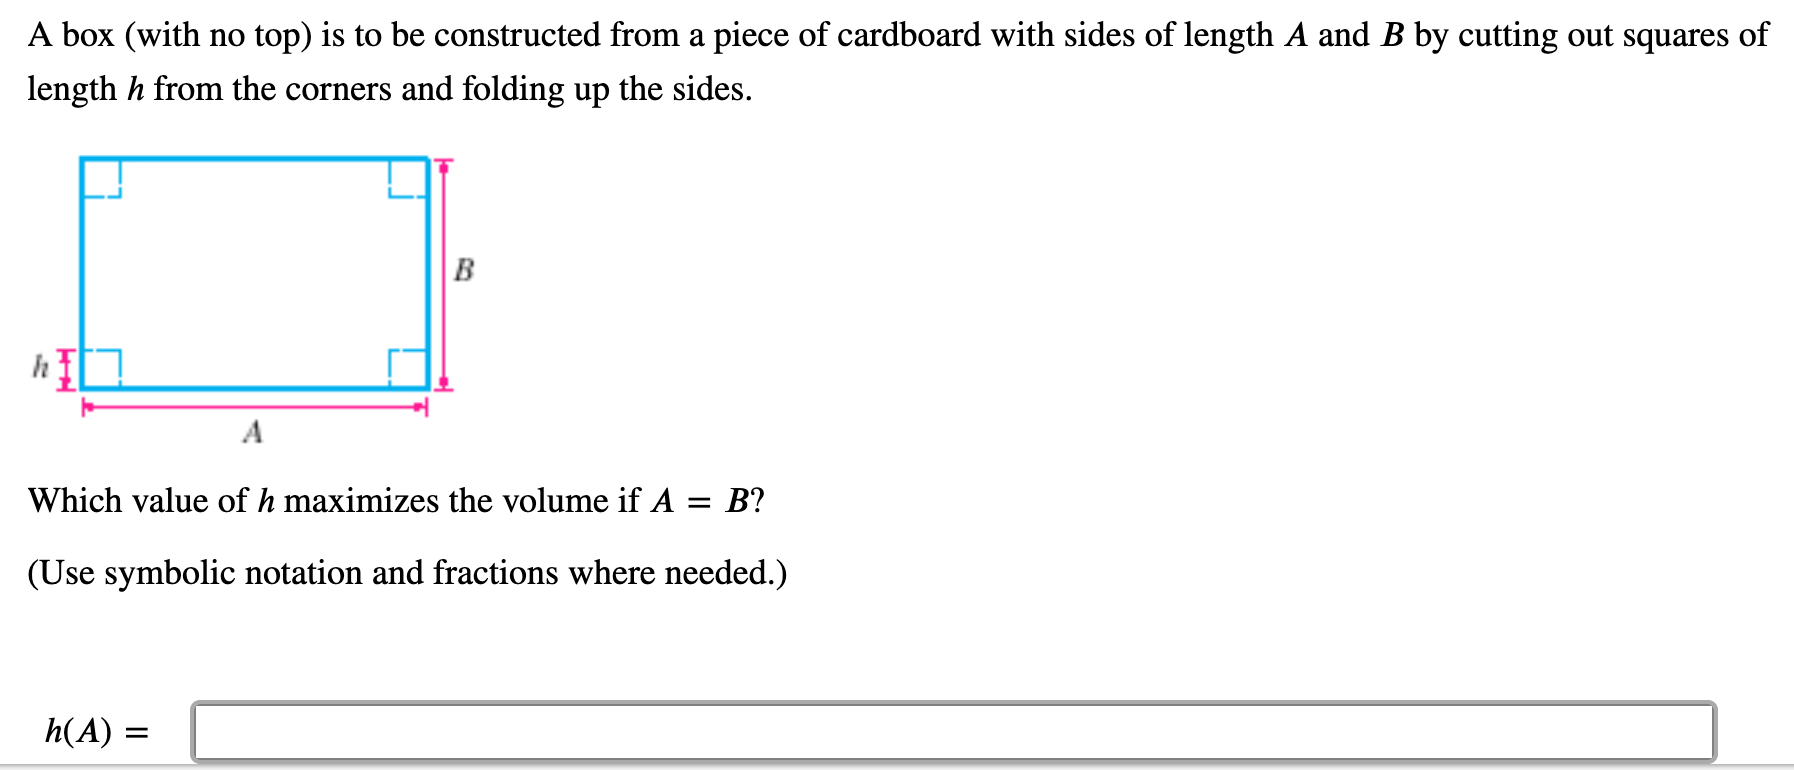 A box (with no top) is to be constructed from a piece of cardboard with sides of length A and B by cutting out squares of
length h from the corners and folding up the sides.
B
A
Which value of h maximizes the volume if A = B?
(Use symbolic notation and fractions where needed.)
h(A) :
